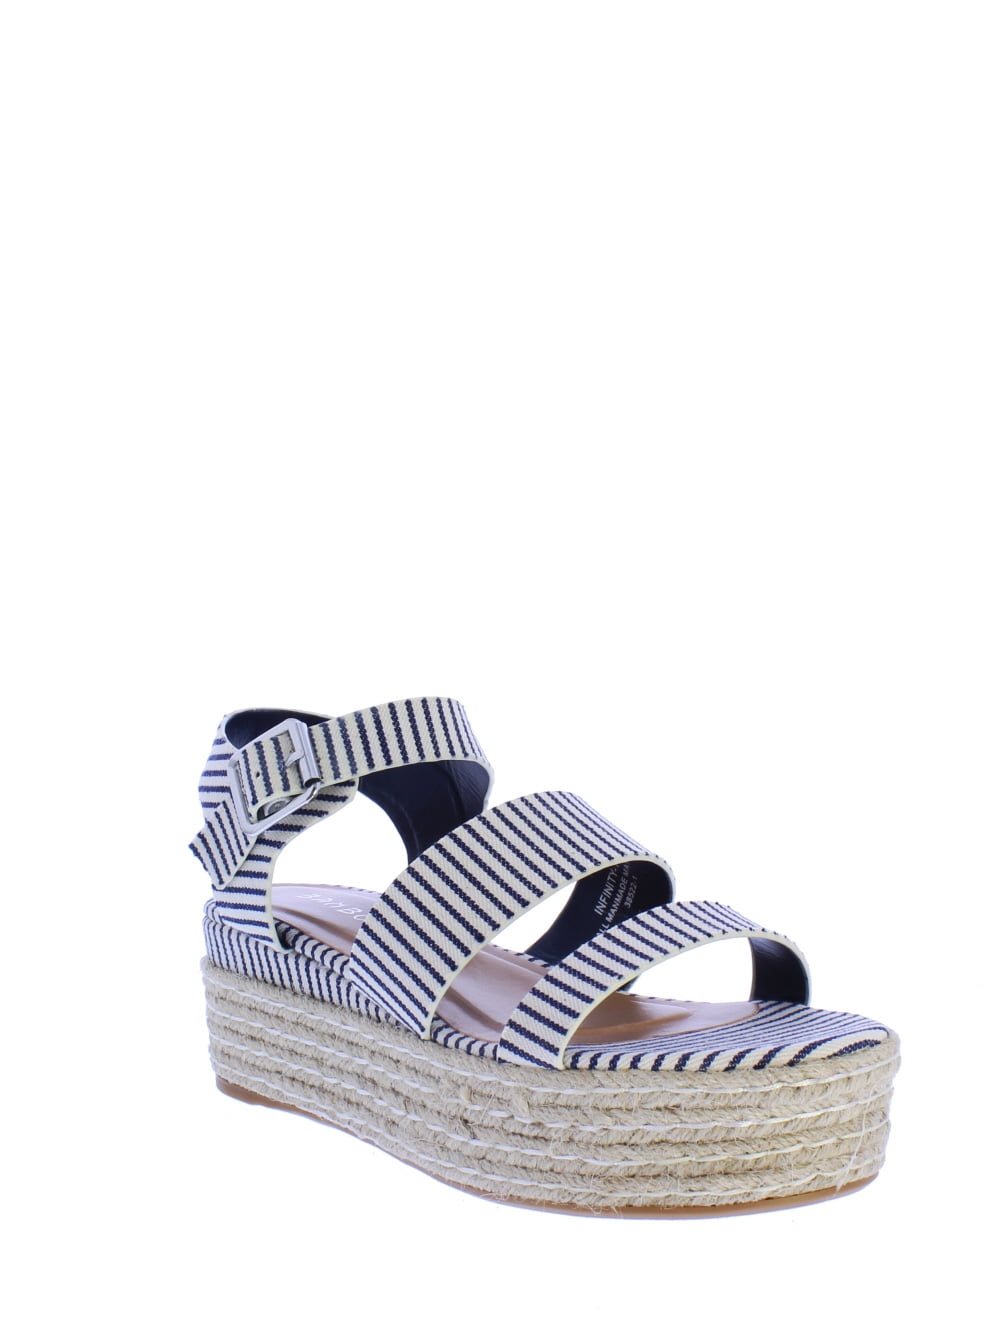 Bamboo Infinity-19 Espadrille Stripped Sandal Navy -